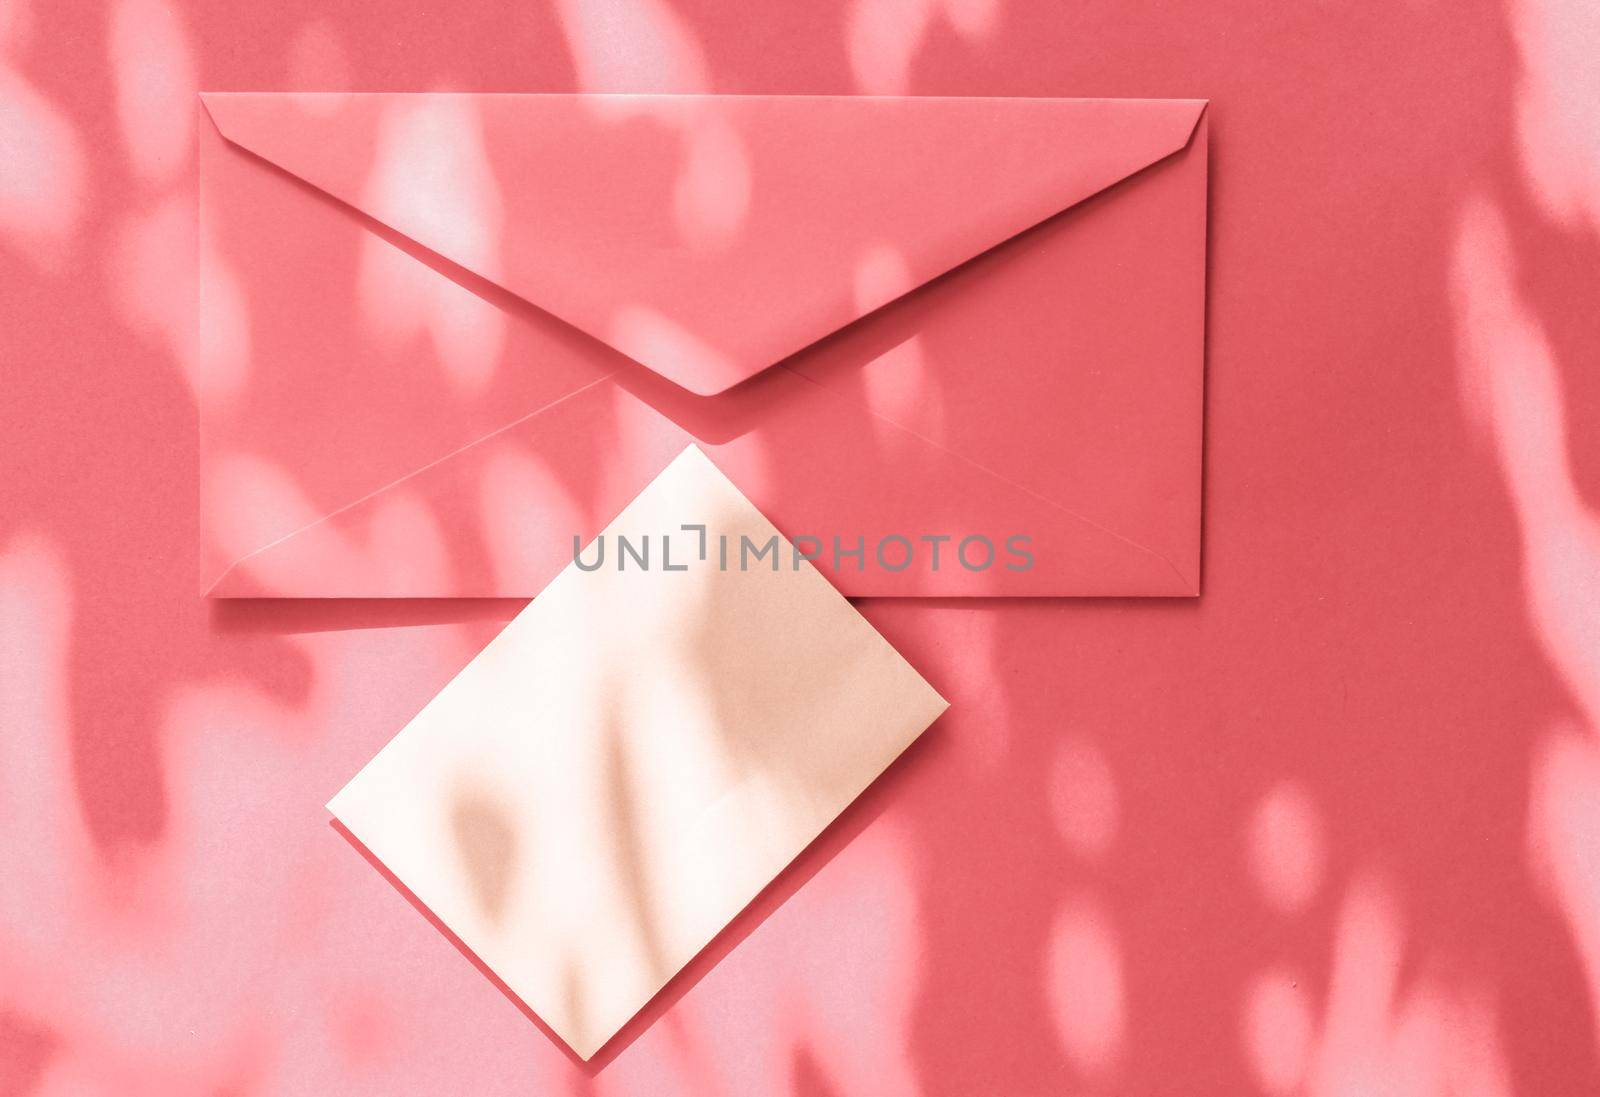 Holiday marketing, business kit and email newsletter concept - Beauty brand identity as flatlay mockup design, business card and letter for online luxury branding on coral shadow background